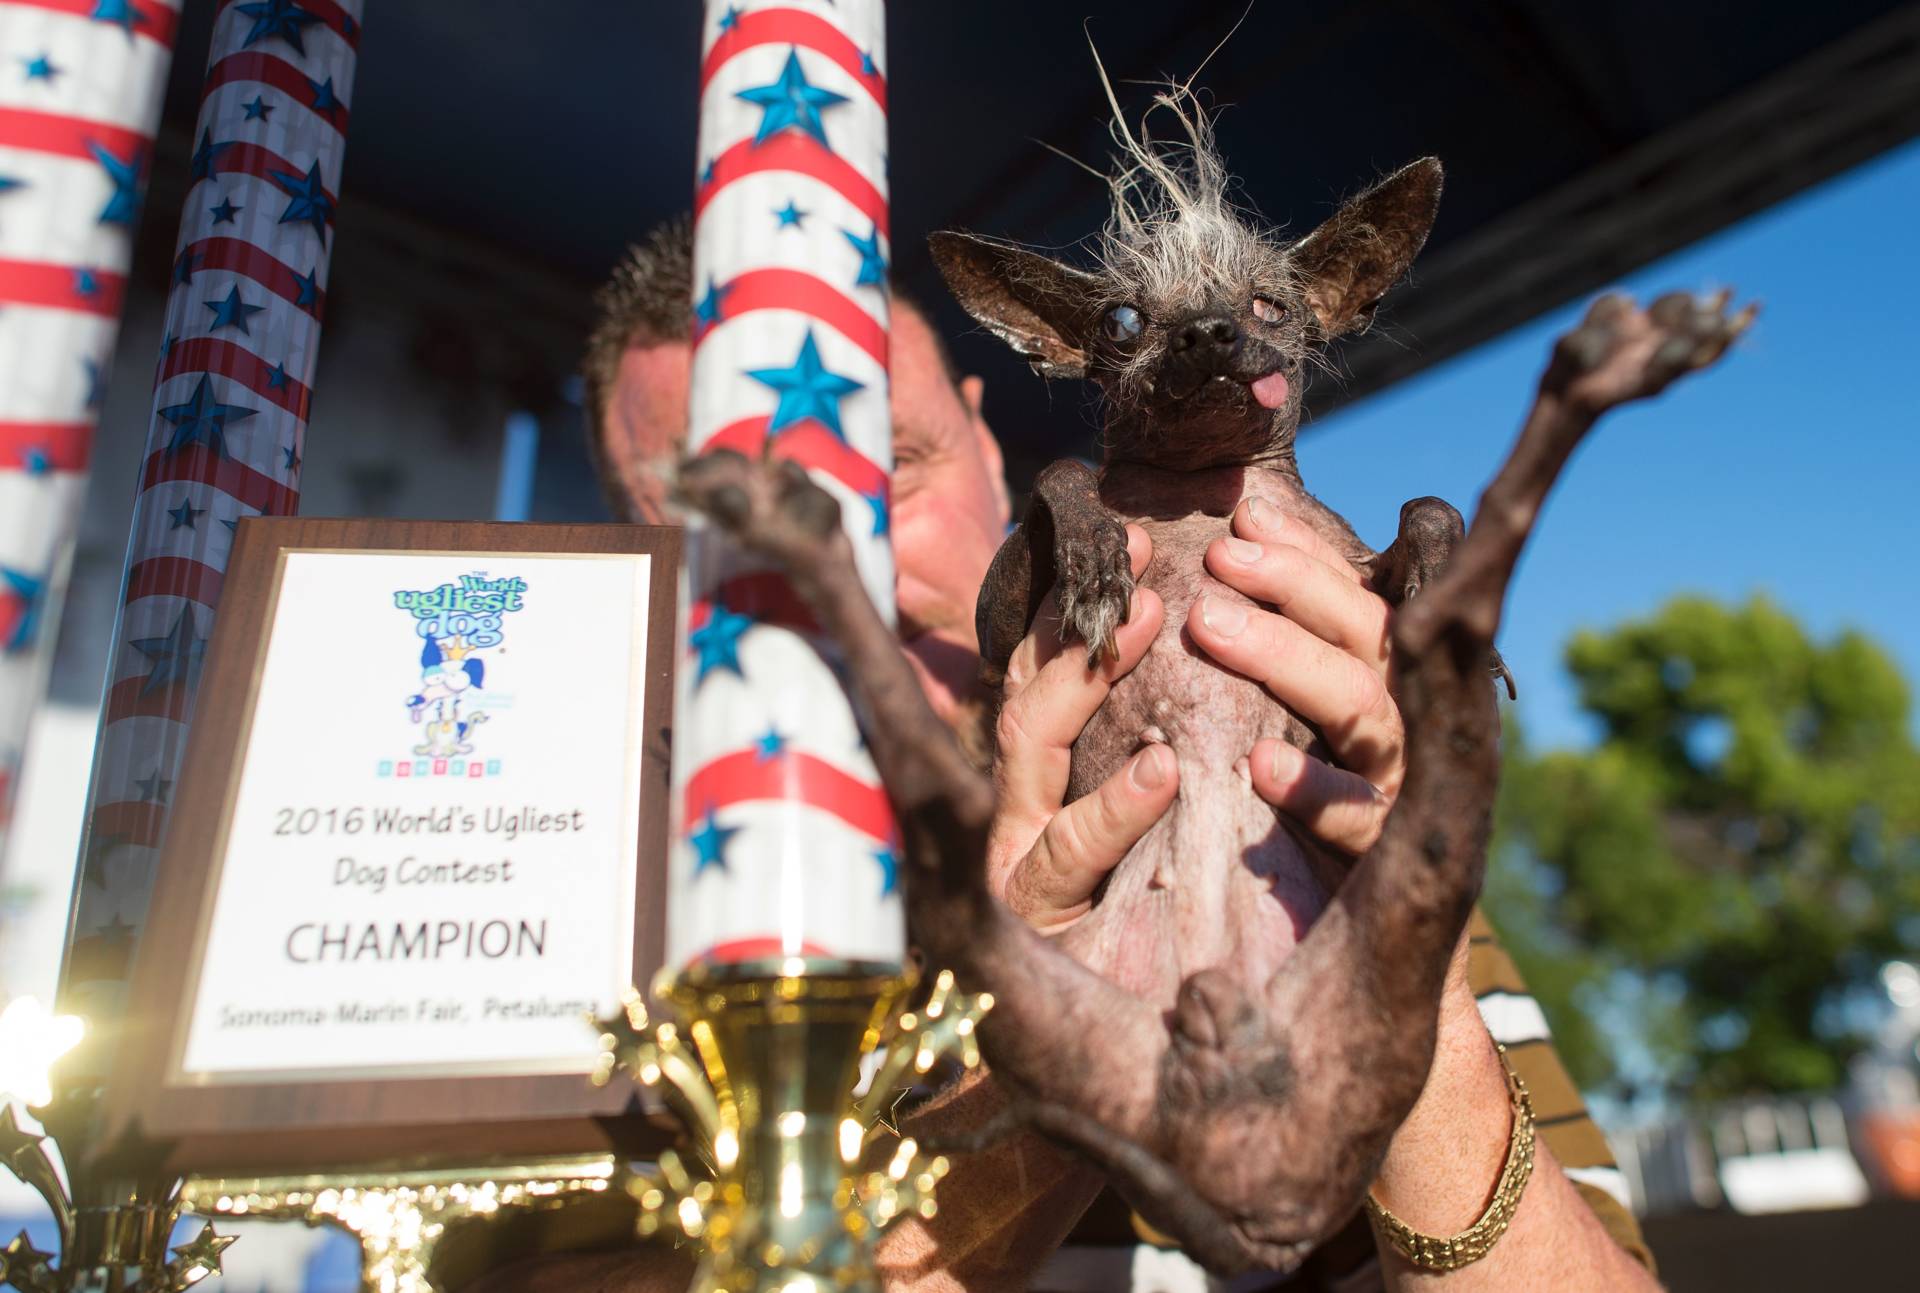 Sweepie Rambo, a Chinese Crested breed, is held up by owner Jason Wurtz after winning the 2016 World's Ugliest Dog Competition. Josh Edelson/AFP/Getty Images